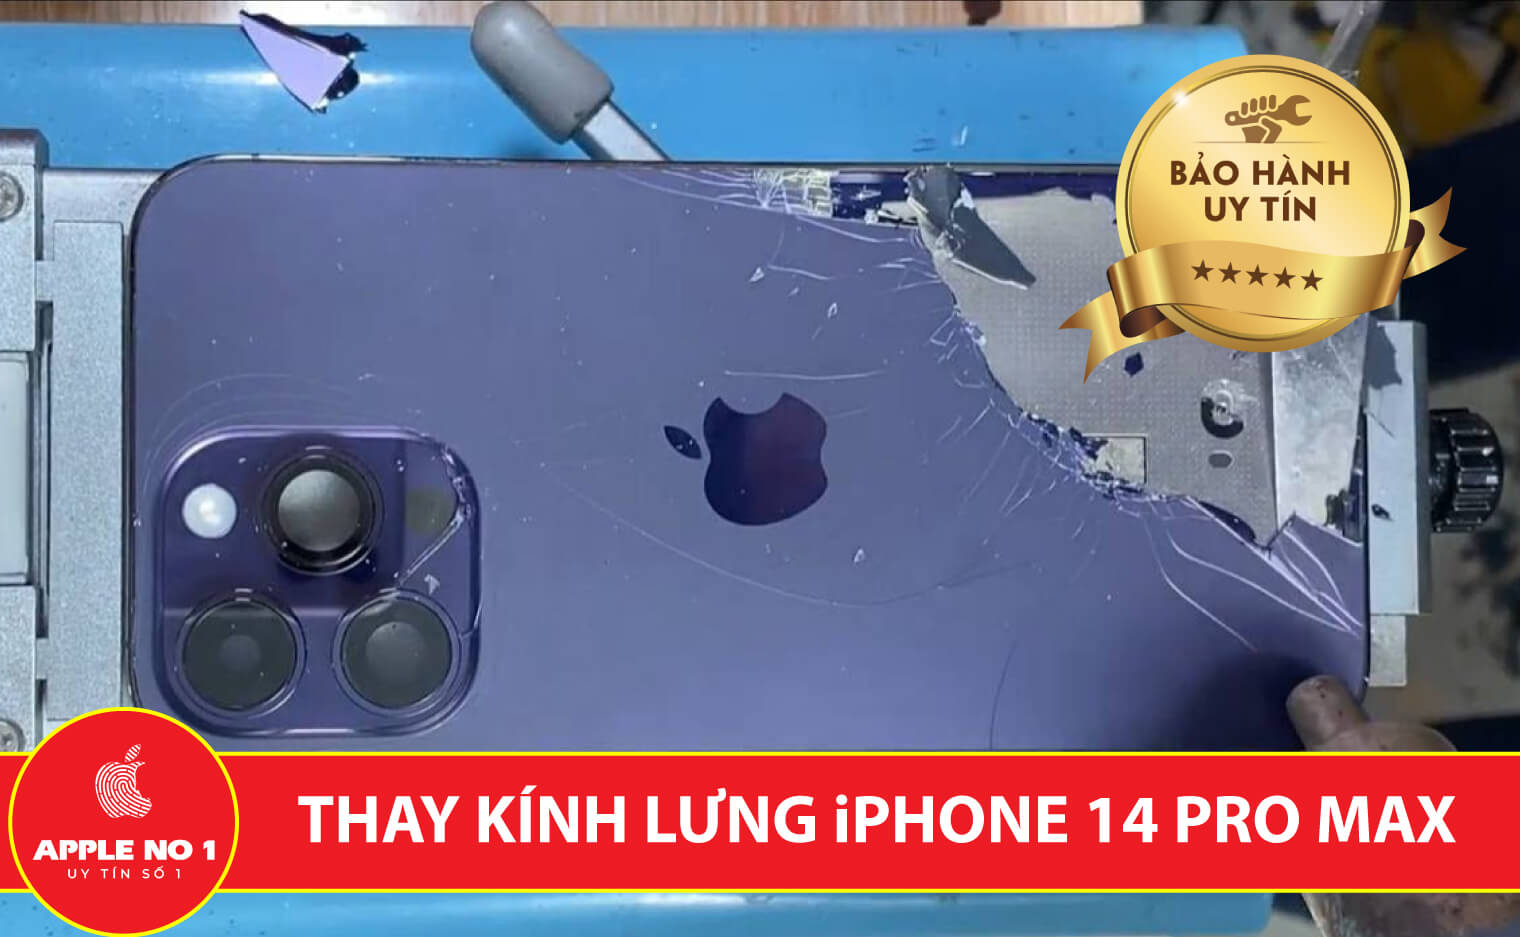 thay kinh lung iphone 14 pro max